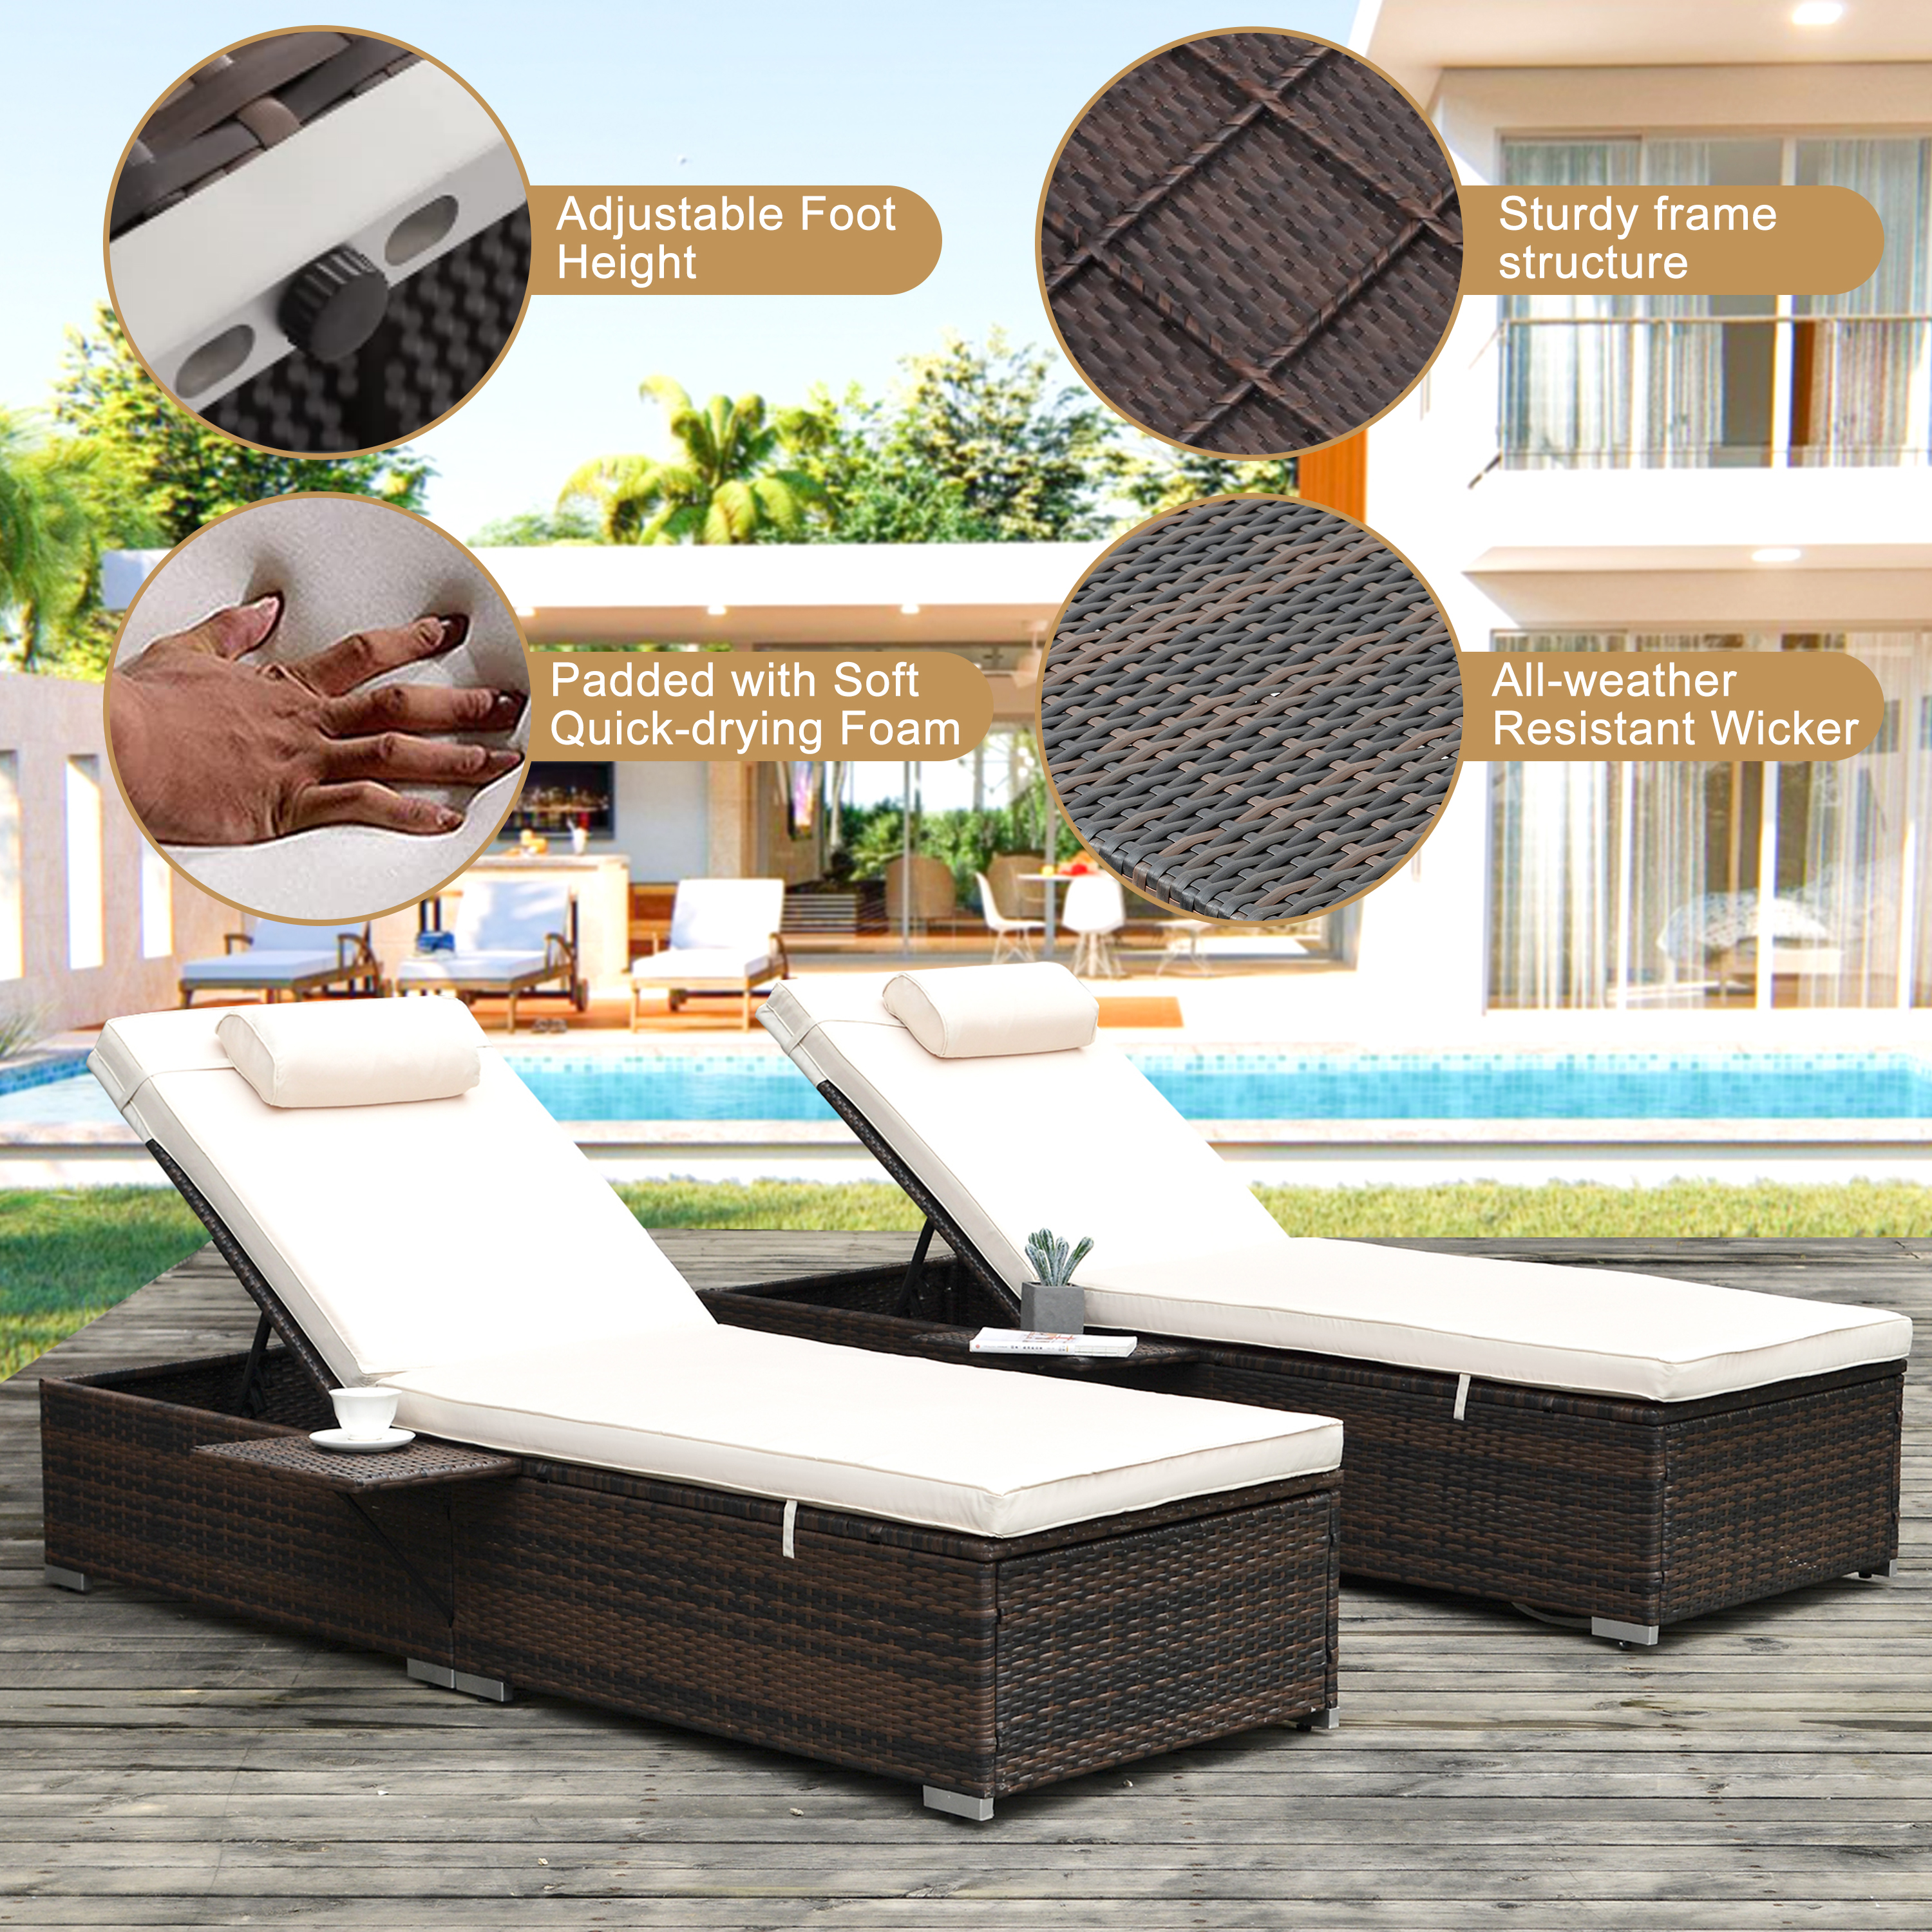 Segmart Outdoor Patio Chaise Lounge Chairs Furniture Set, PE Rattan Wicker Beach Pool Lounge Chair with Side Table, Adjustable 5 Position, Reclining Chaise Chairs, Beige, SS2350 - image 3 of 8